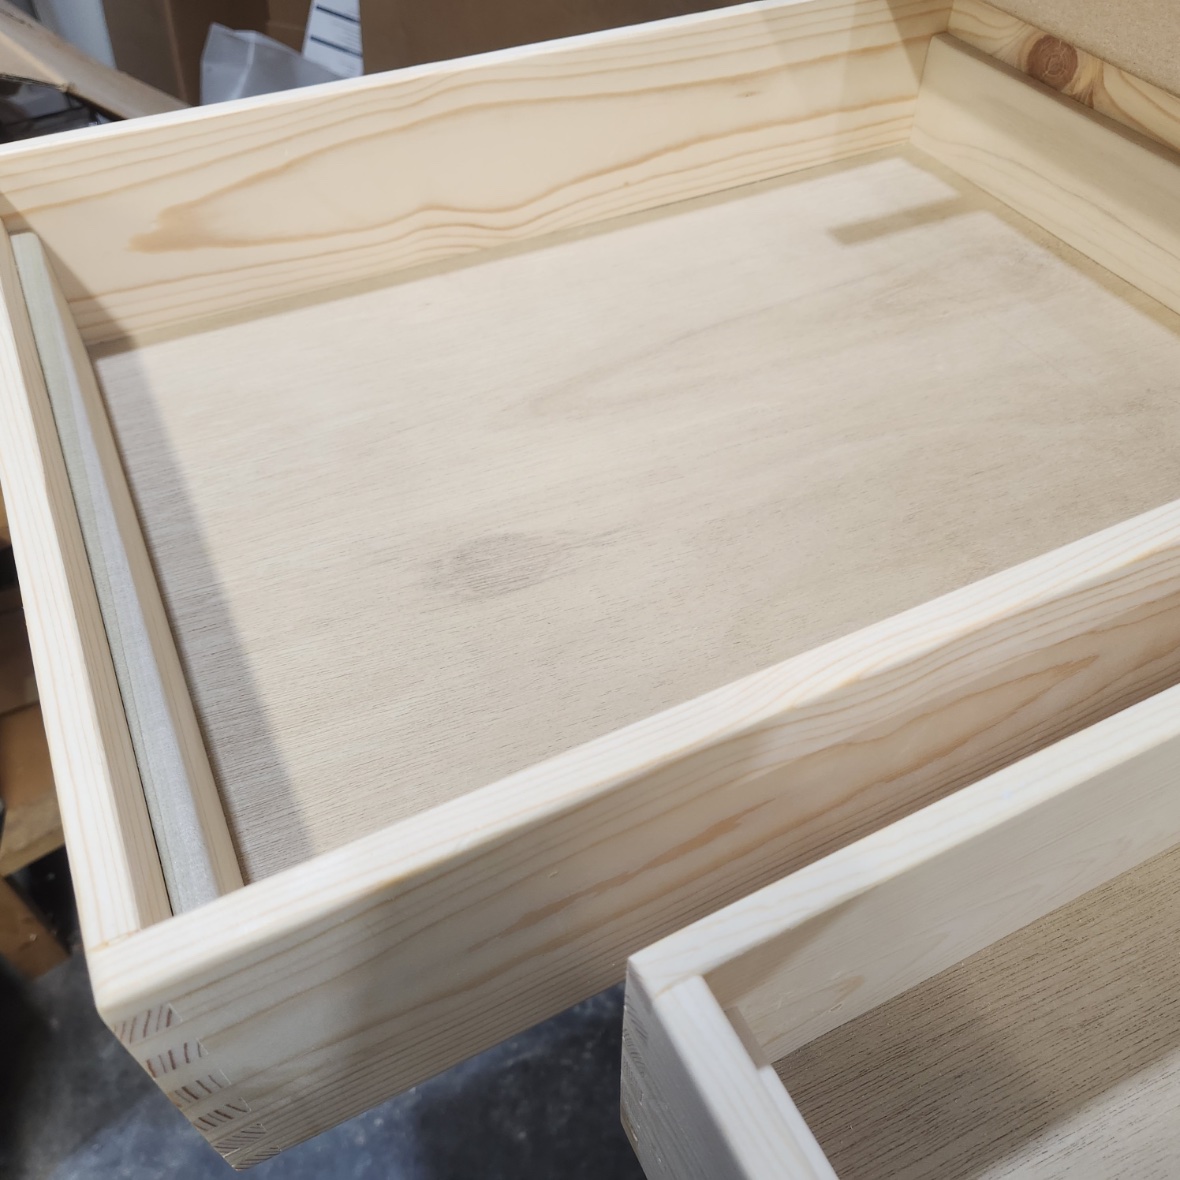 Eventually I will make an upper tray for each drawer.